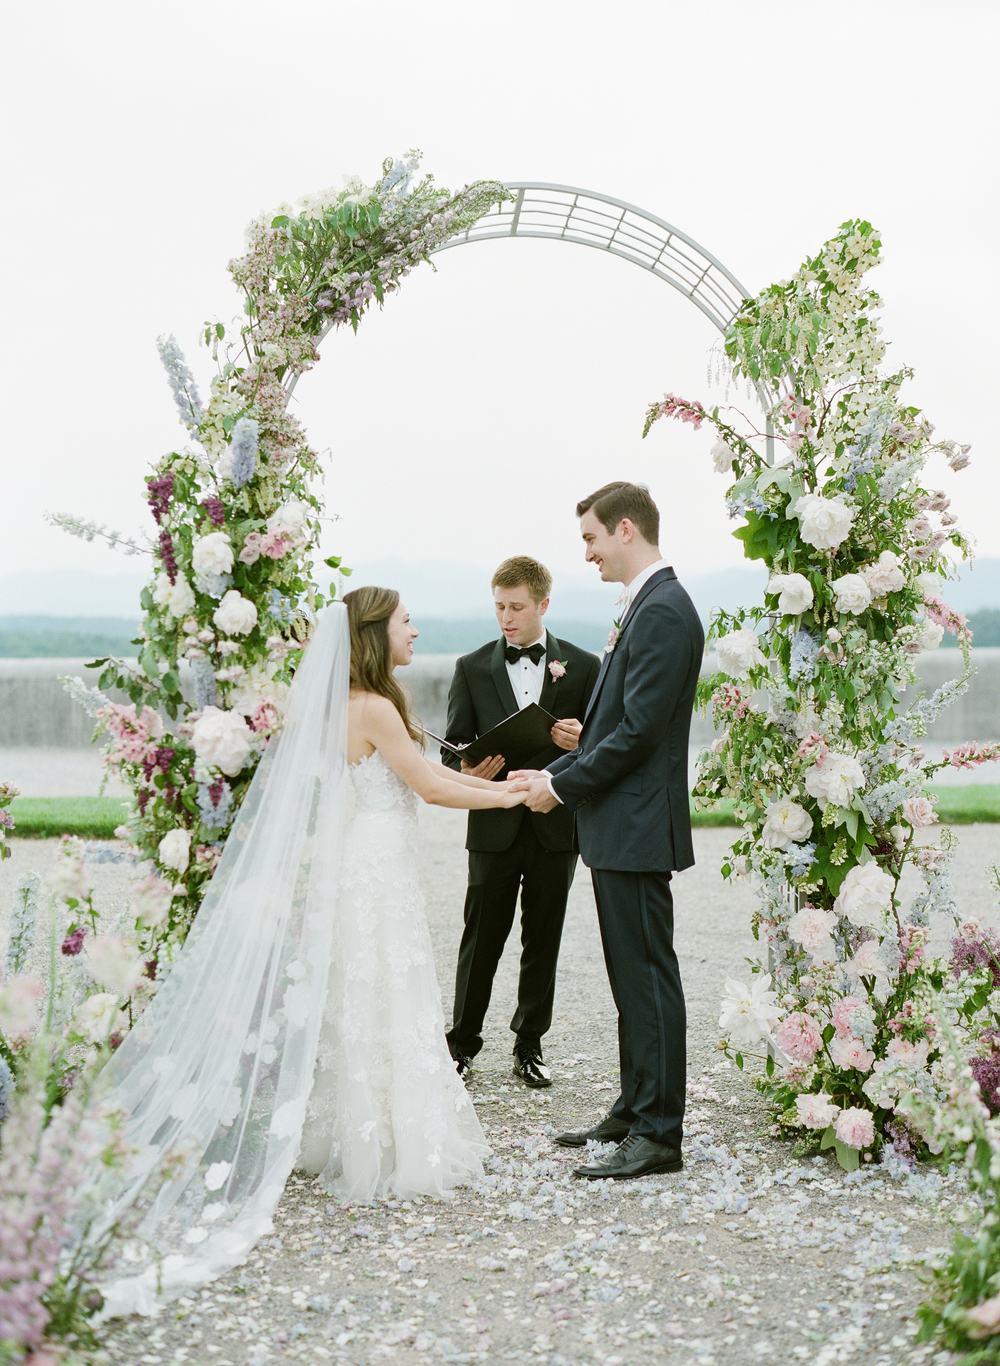 french garden floral arch at wedding ceremony